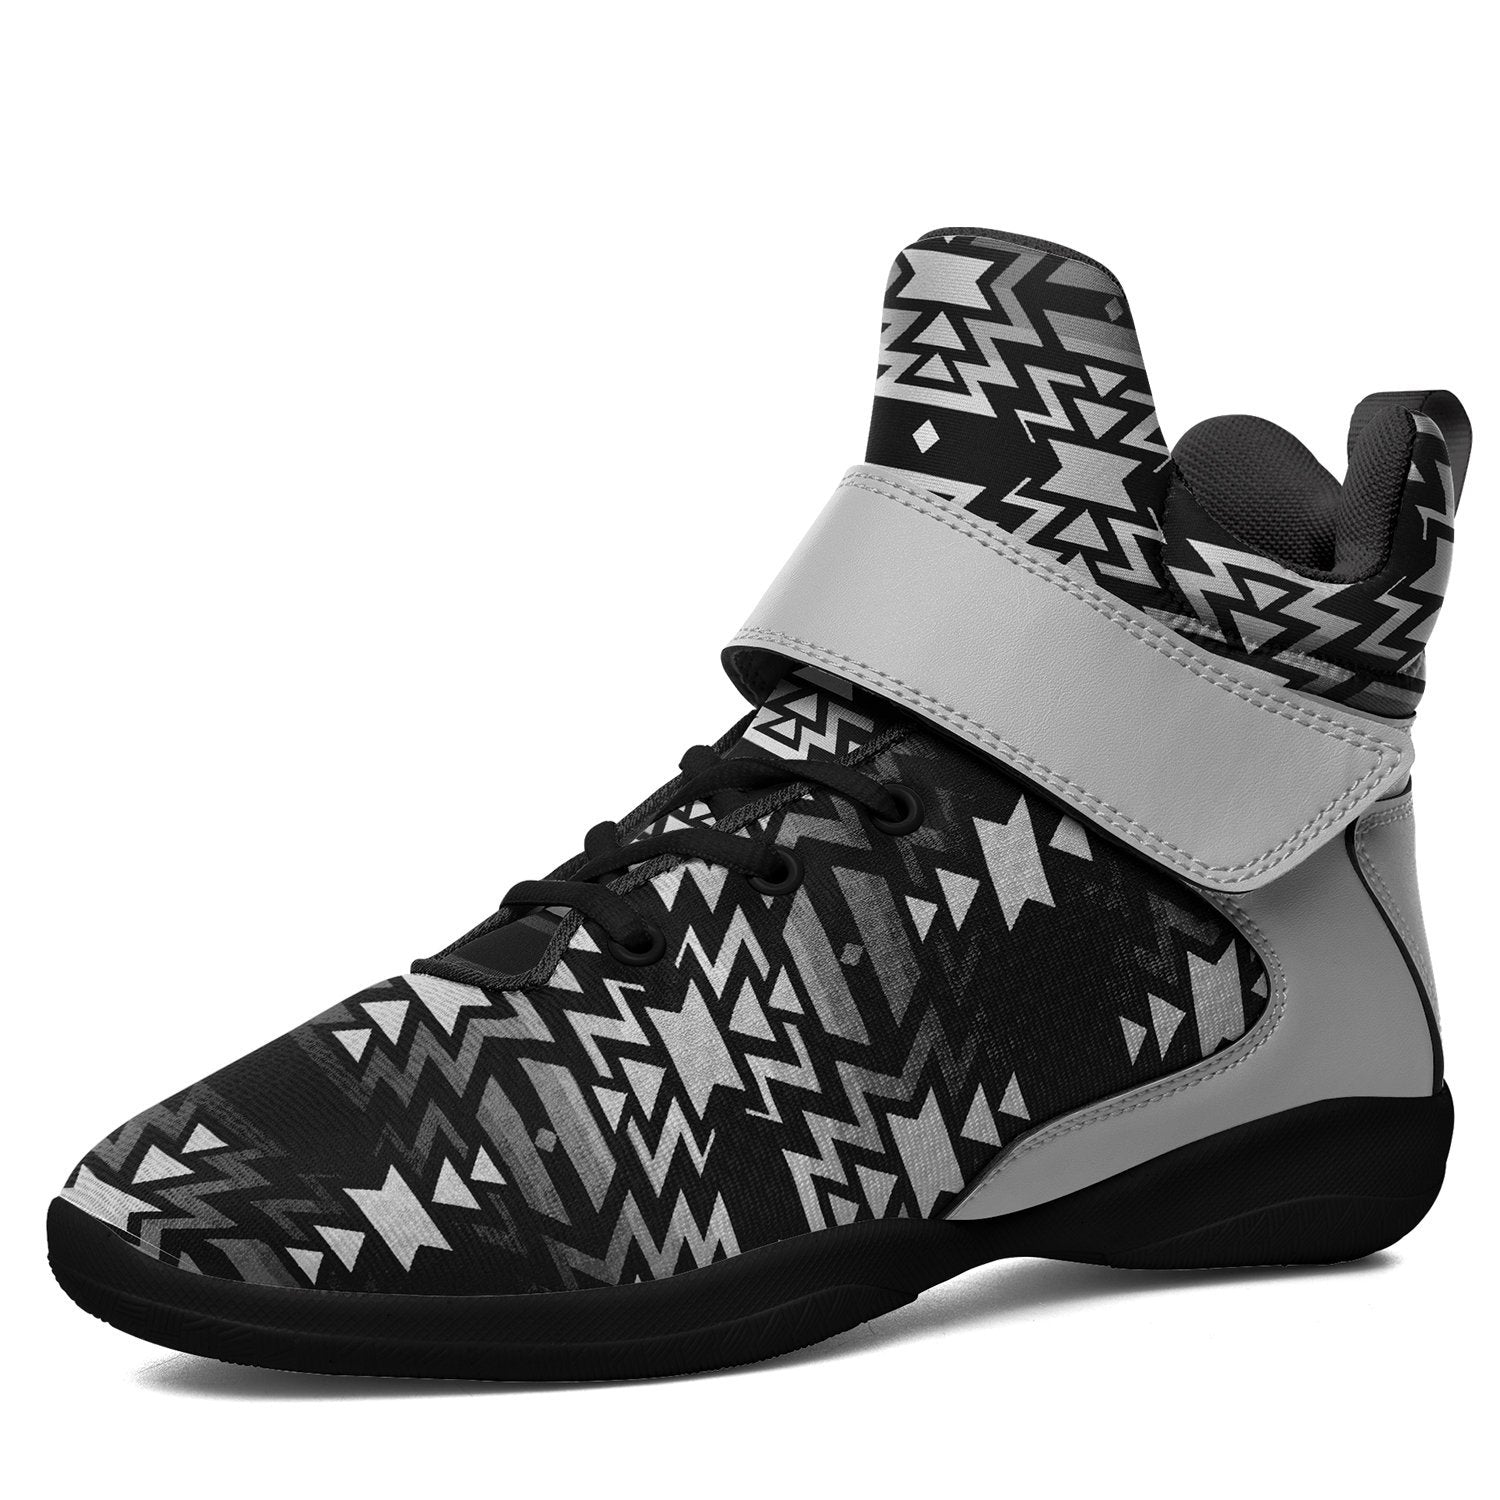 Black Fire Black and White Ipottaa Basketball / Sport High Top Shoes - Black Sole 49 Dzine US Women 8.5 / EUR 40 Black Sole with Gray Strap 